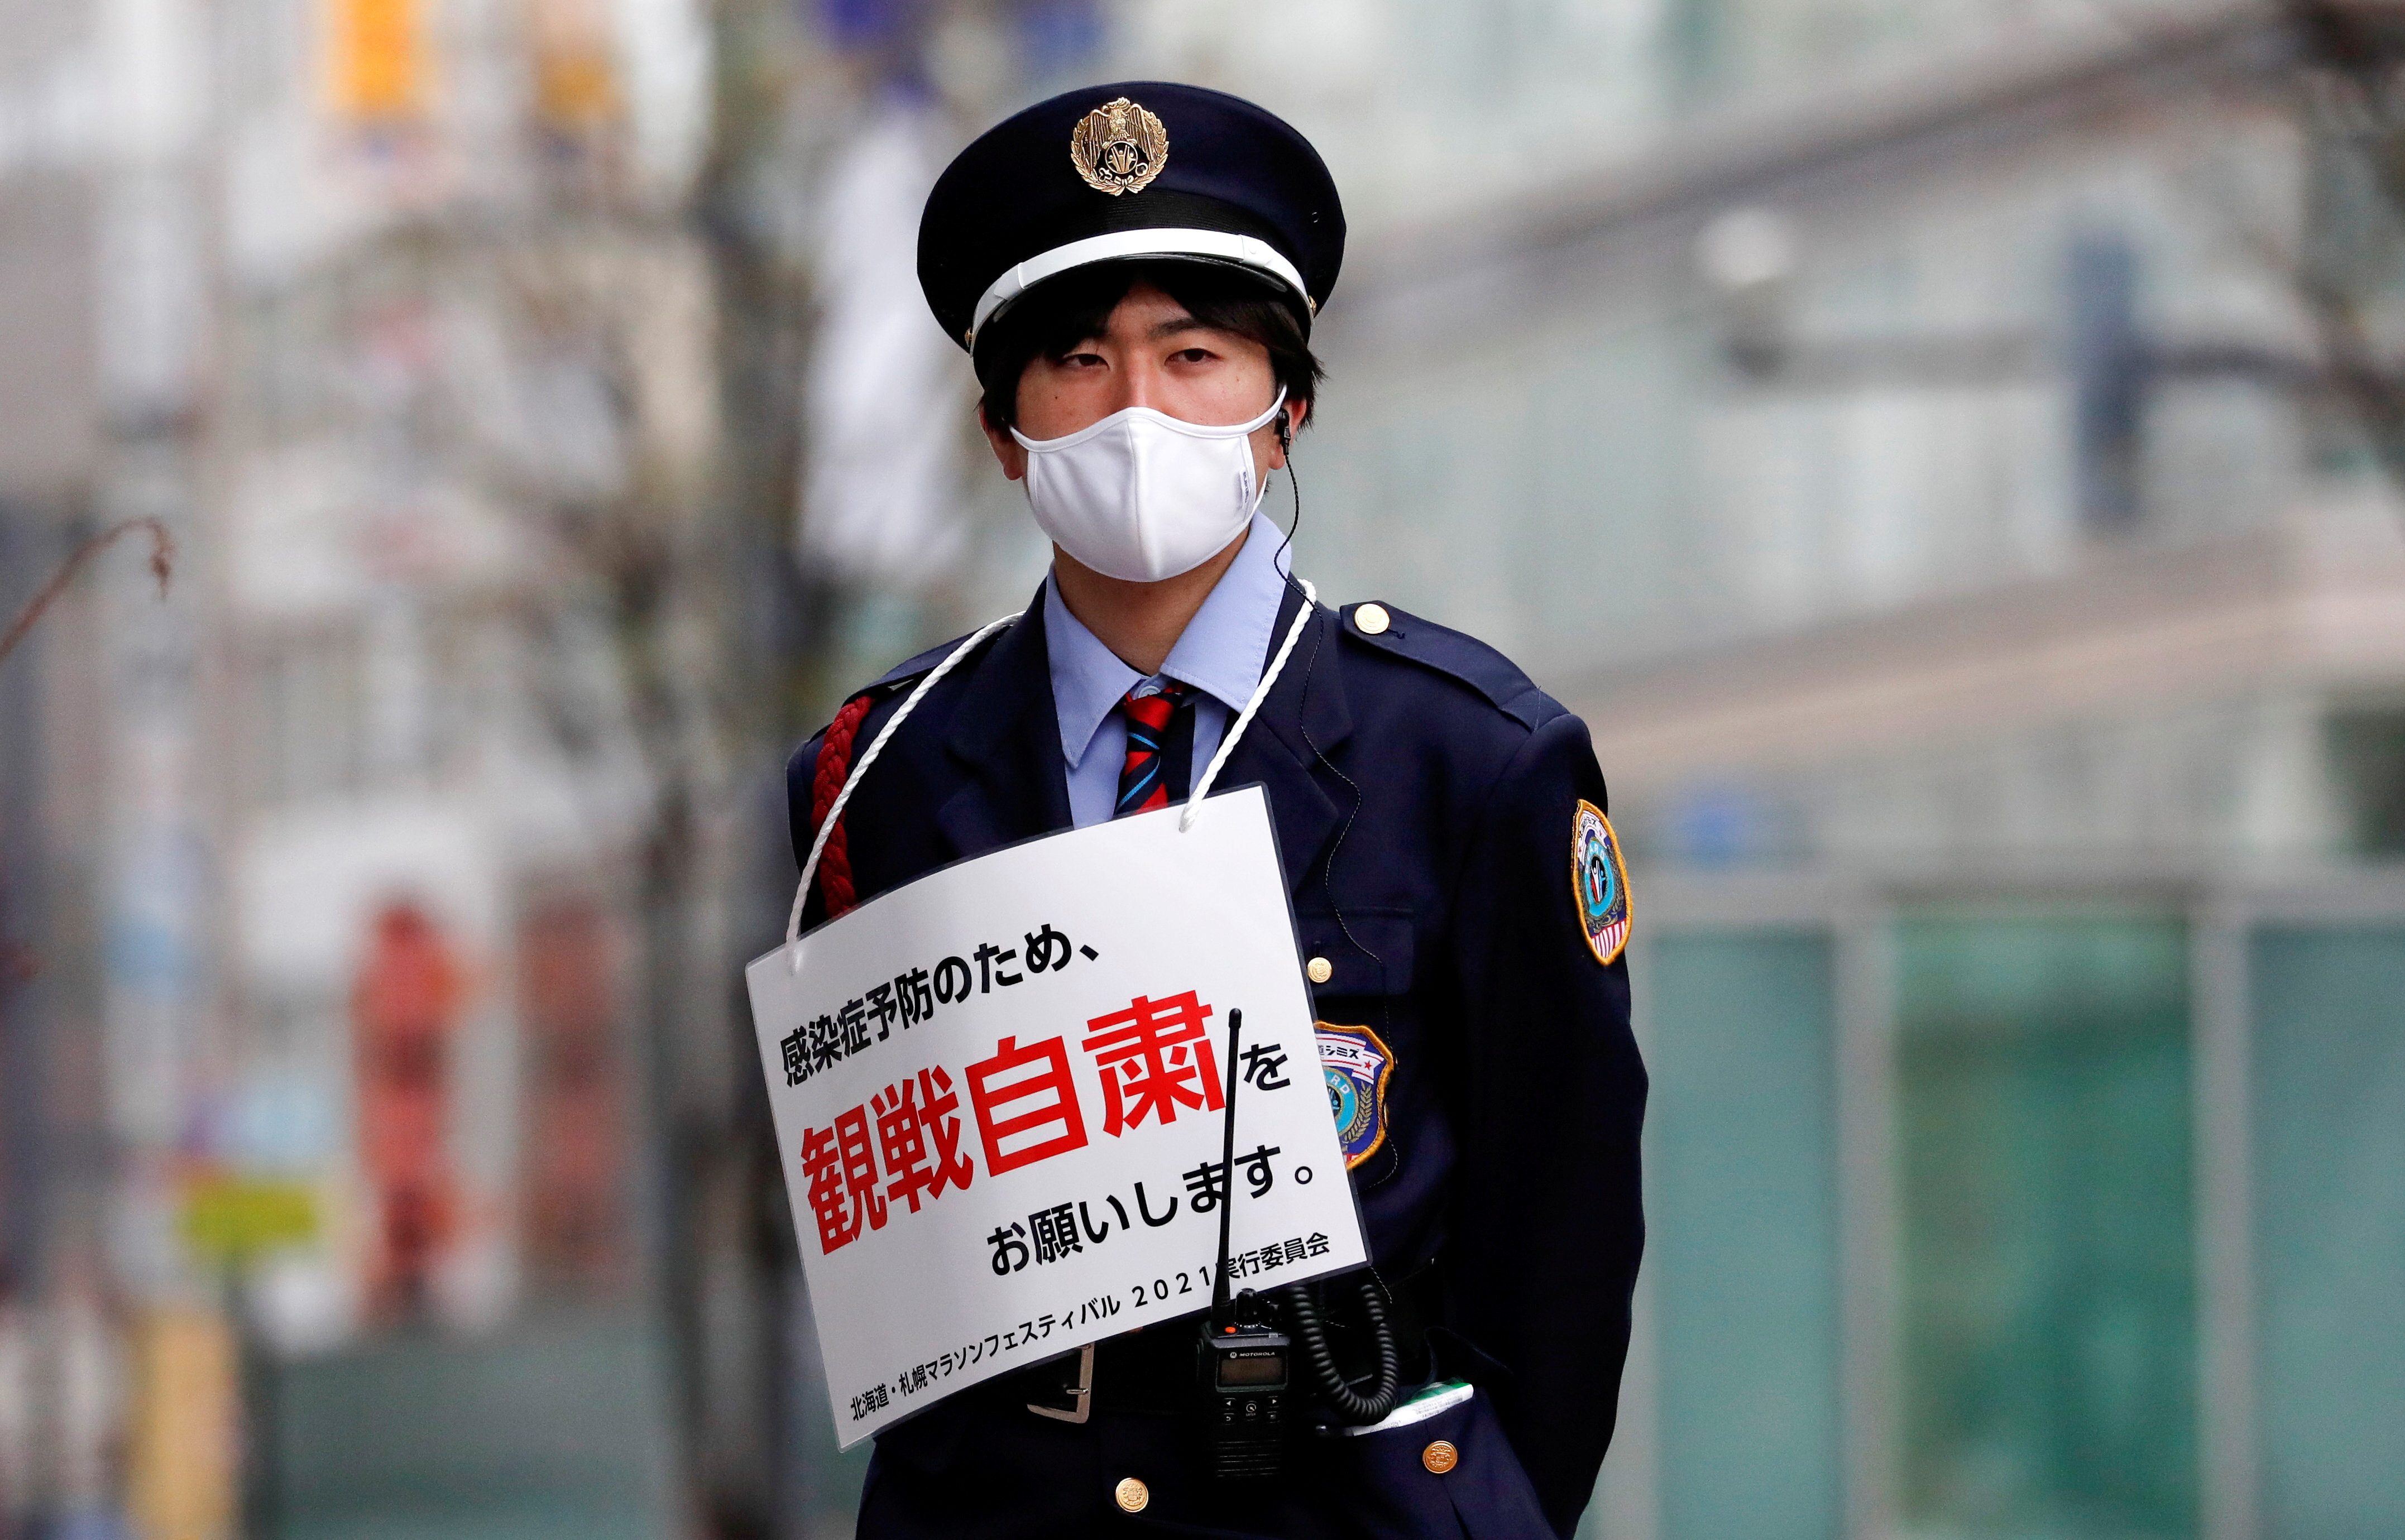 Japan faces longer state of emergency, casting doubt on Olympics